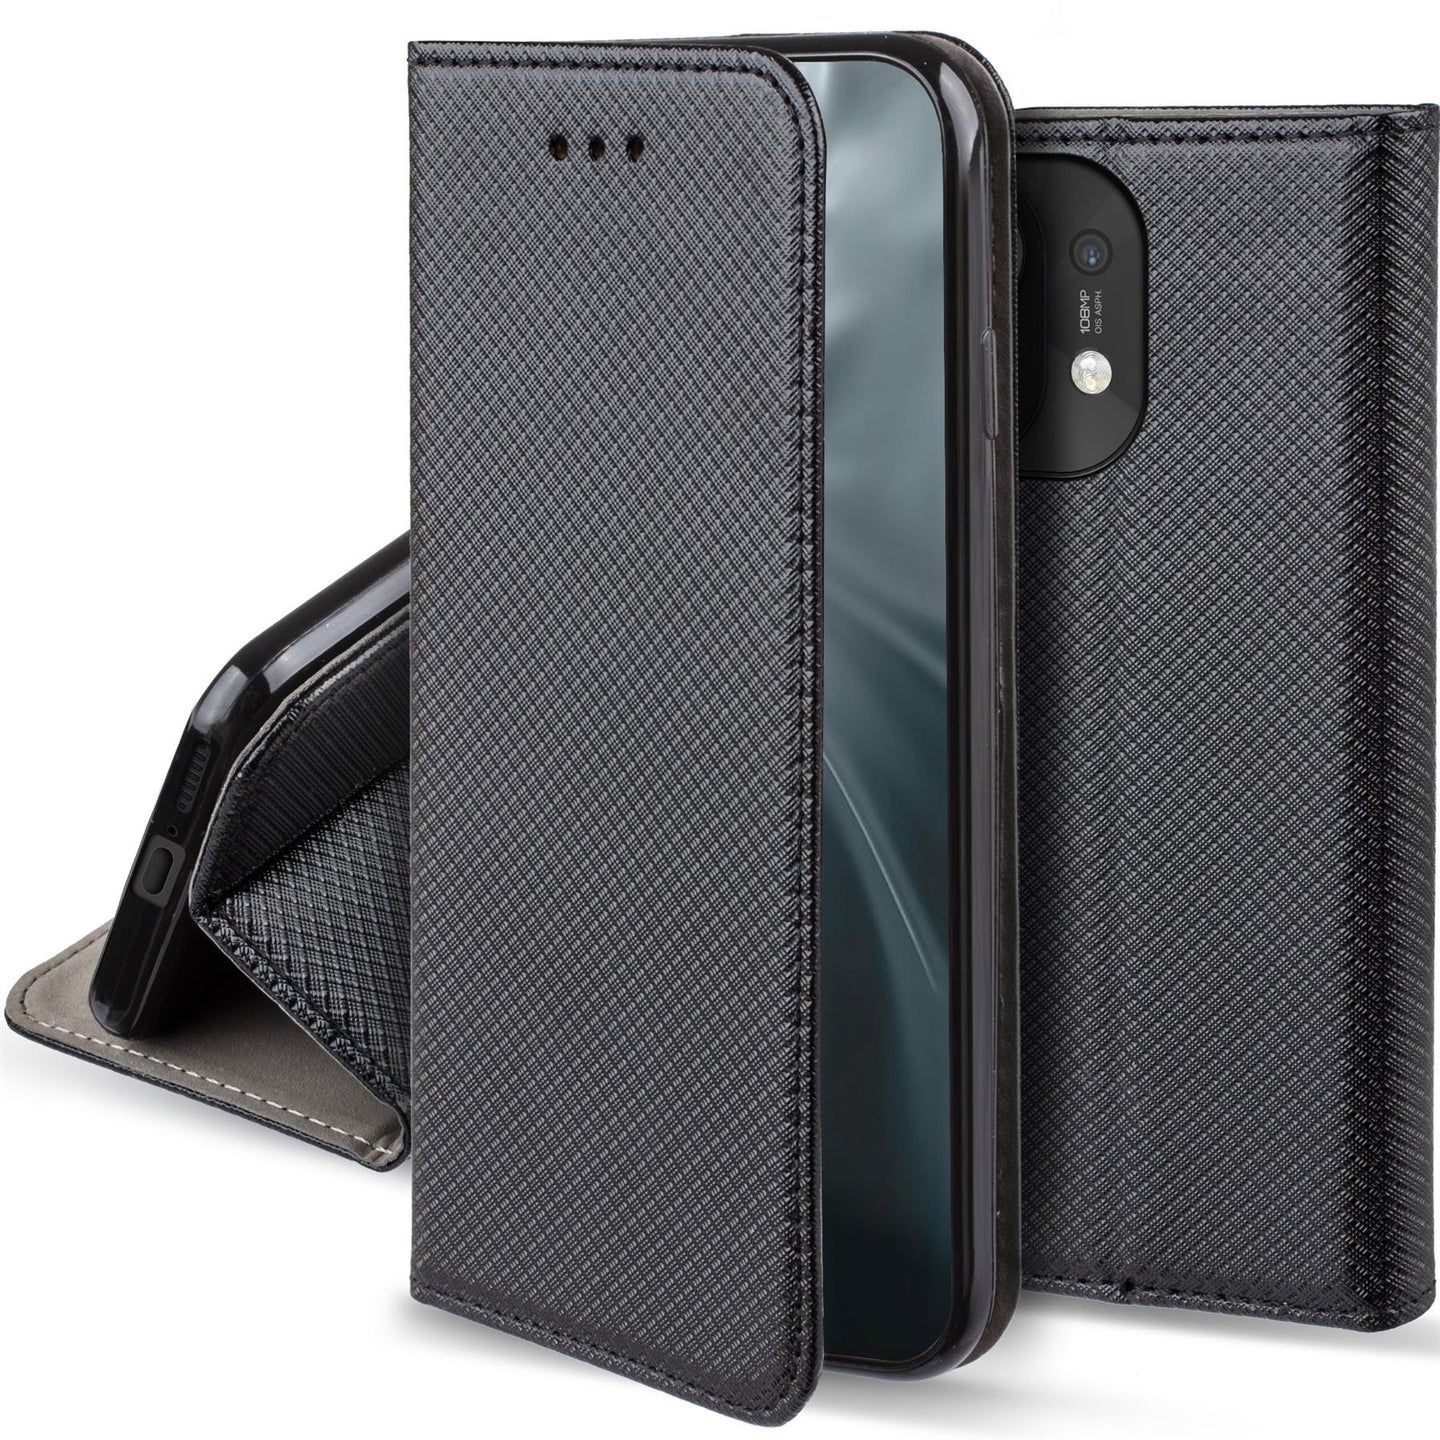 Moozy Case Flip Cover for Xiaomi Mi 11, Black - Smart Magnetic Flip Case Flip Folio Wallet Case with Card Holder and Stand, Credit Card Slots10,99